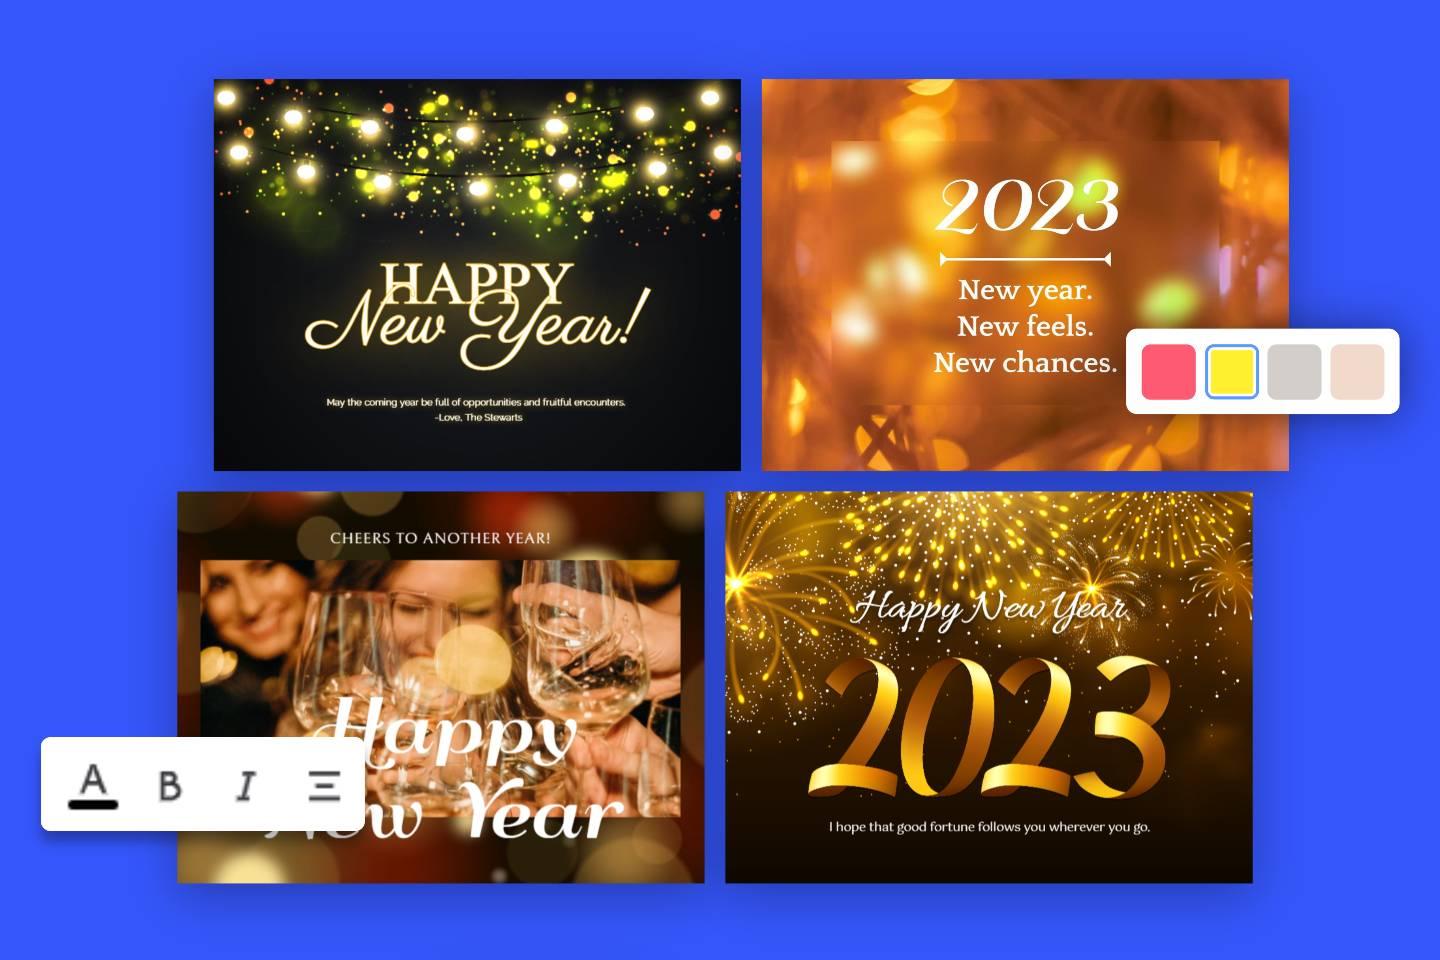 New Year Card Maker: Create a Free Happy New Year 2023 Card Online